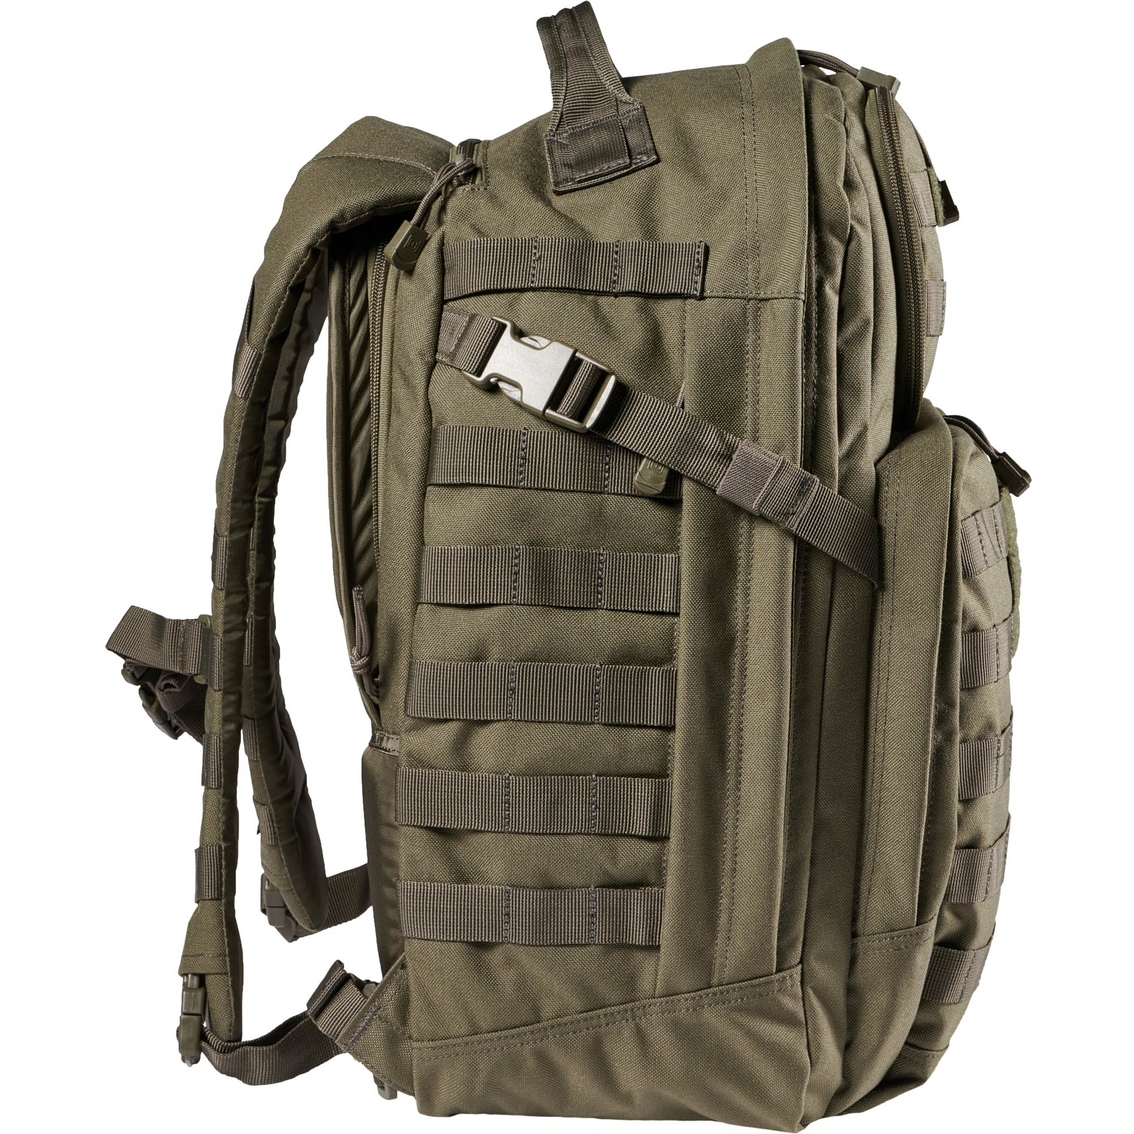 5.11 RUSH 24 2.0 Backpack - Image 5 of 9